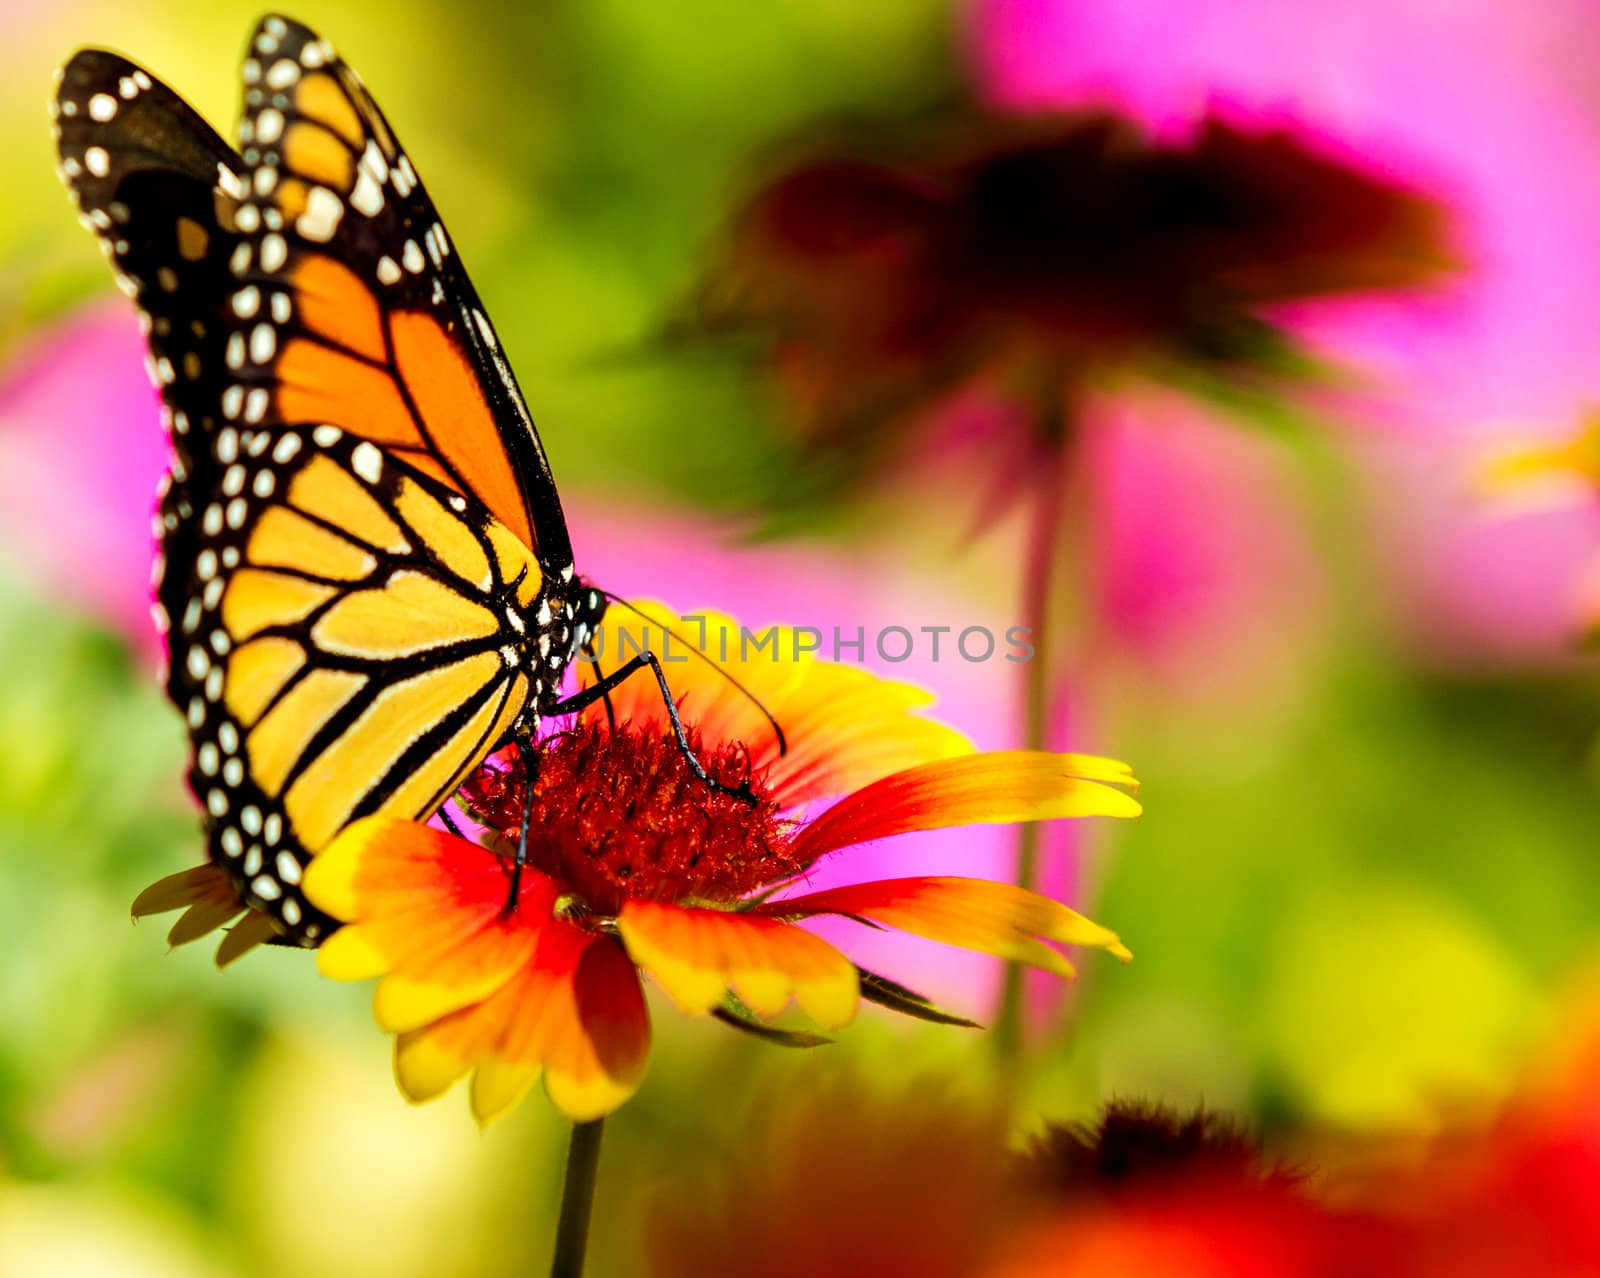 Very colorful image displaying a Monarch butterfly on a bright flower. 